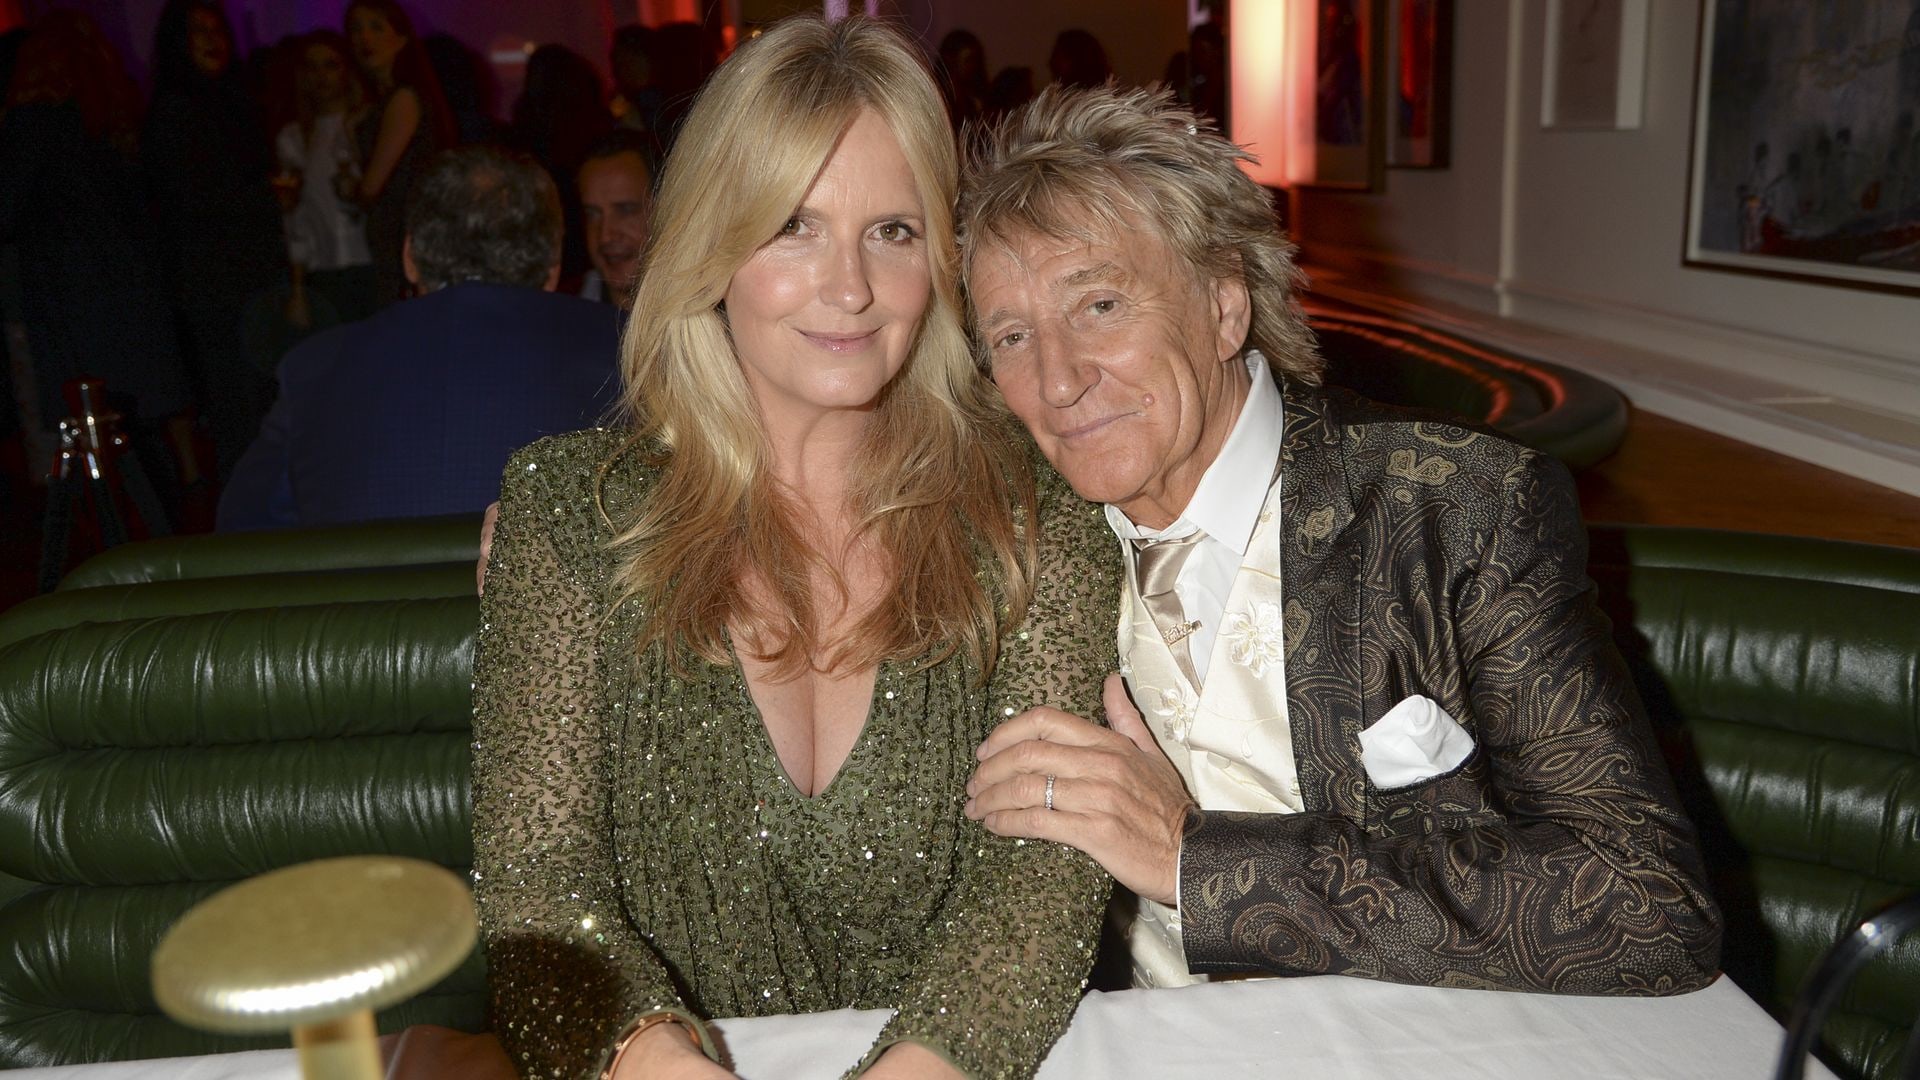 Penny Lancaster in green dress and Rod Stewart in suit